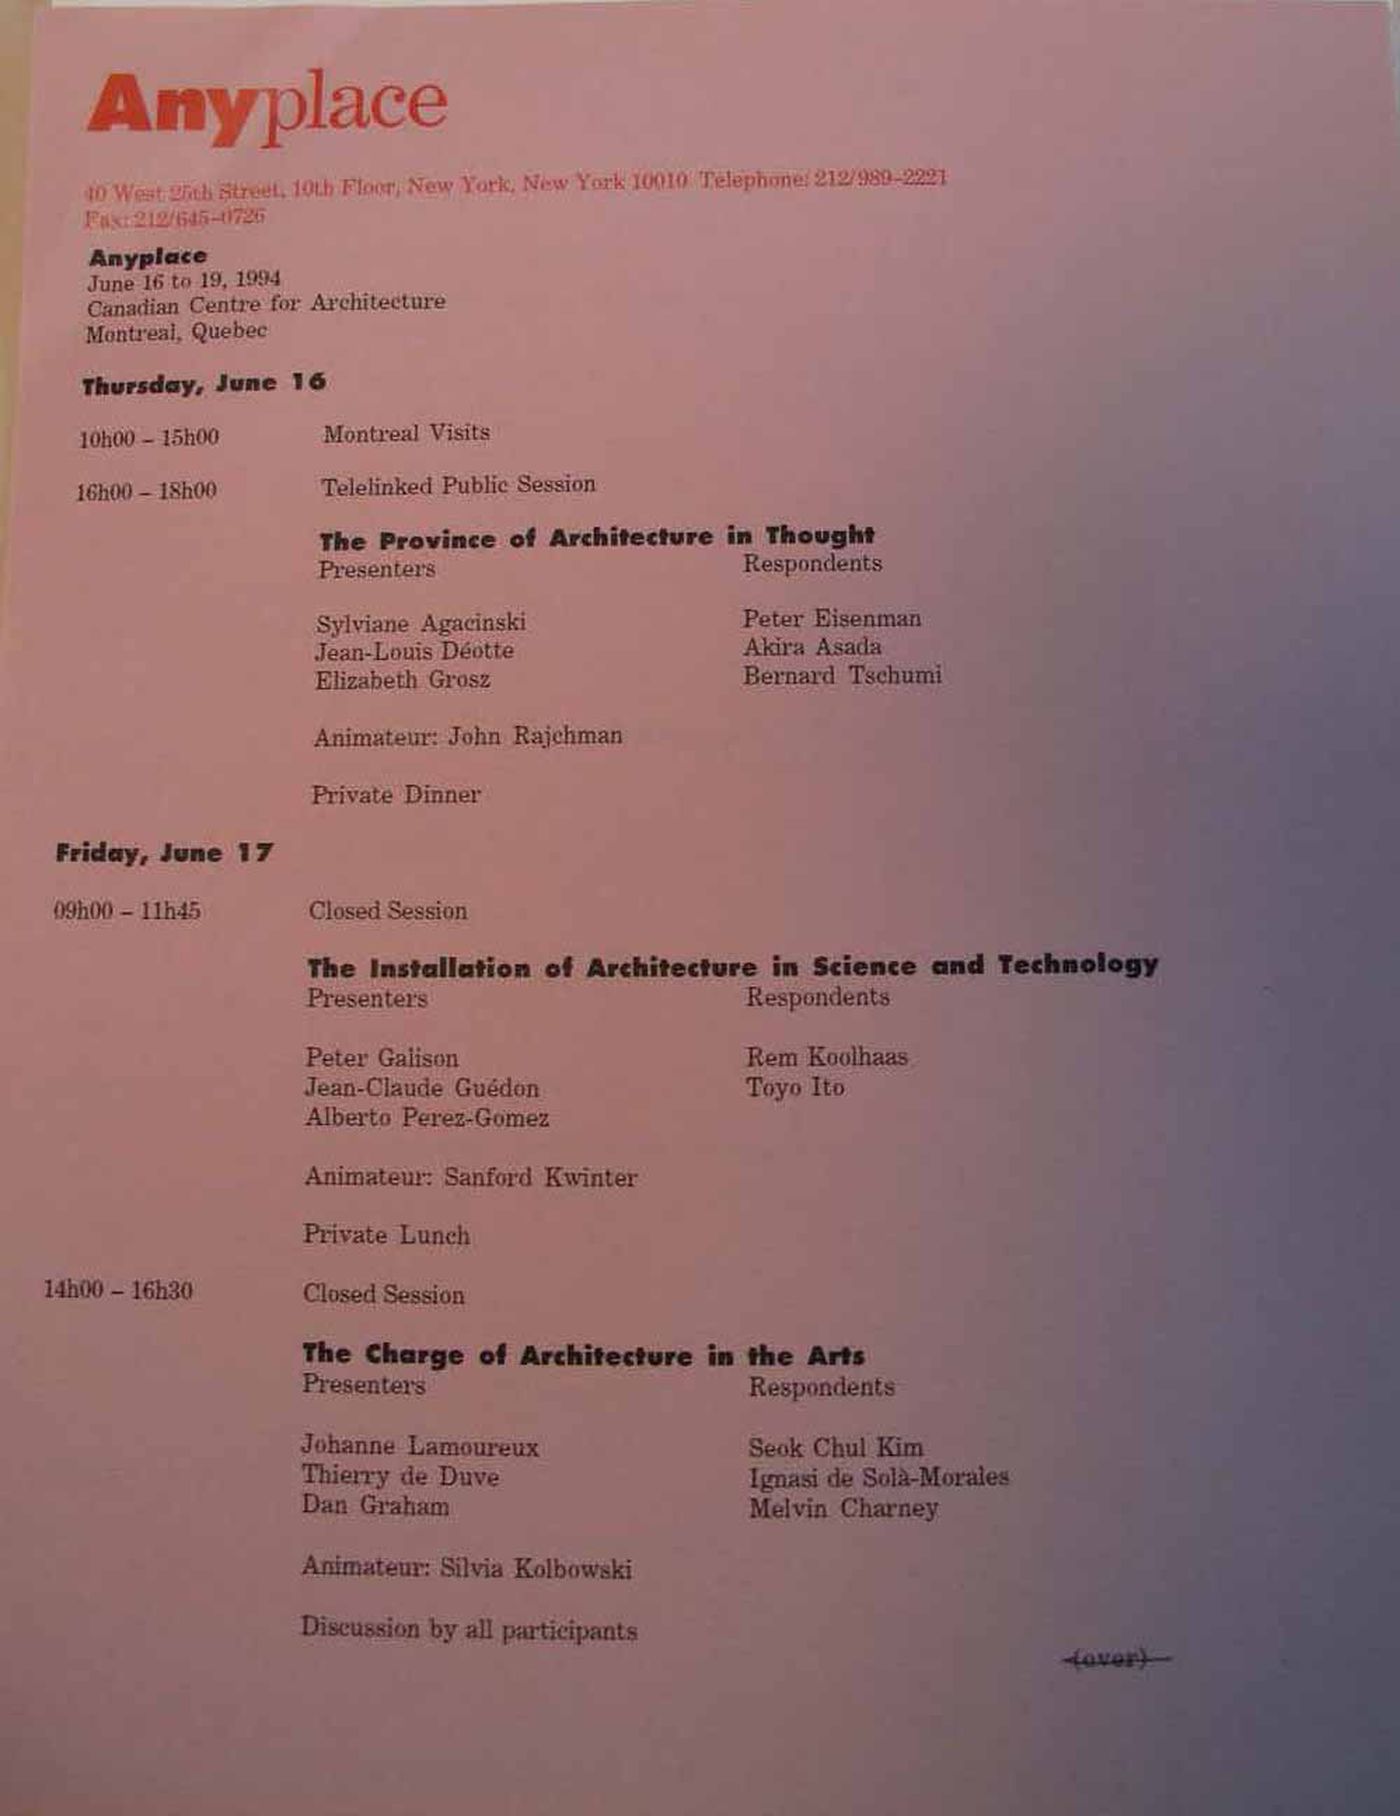 Program for the Anyplace Conference at the Canadian Centre for Architecture